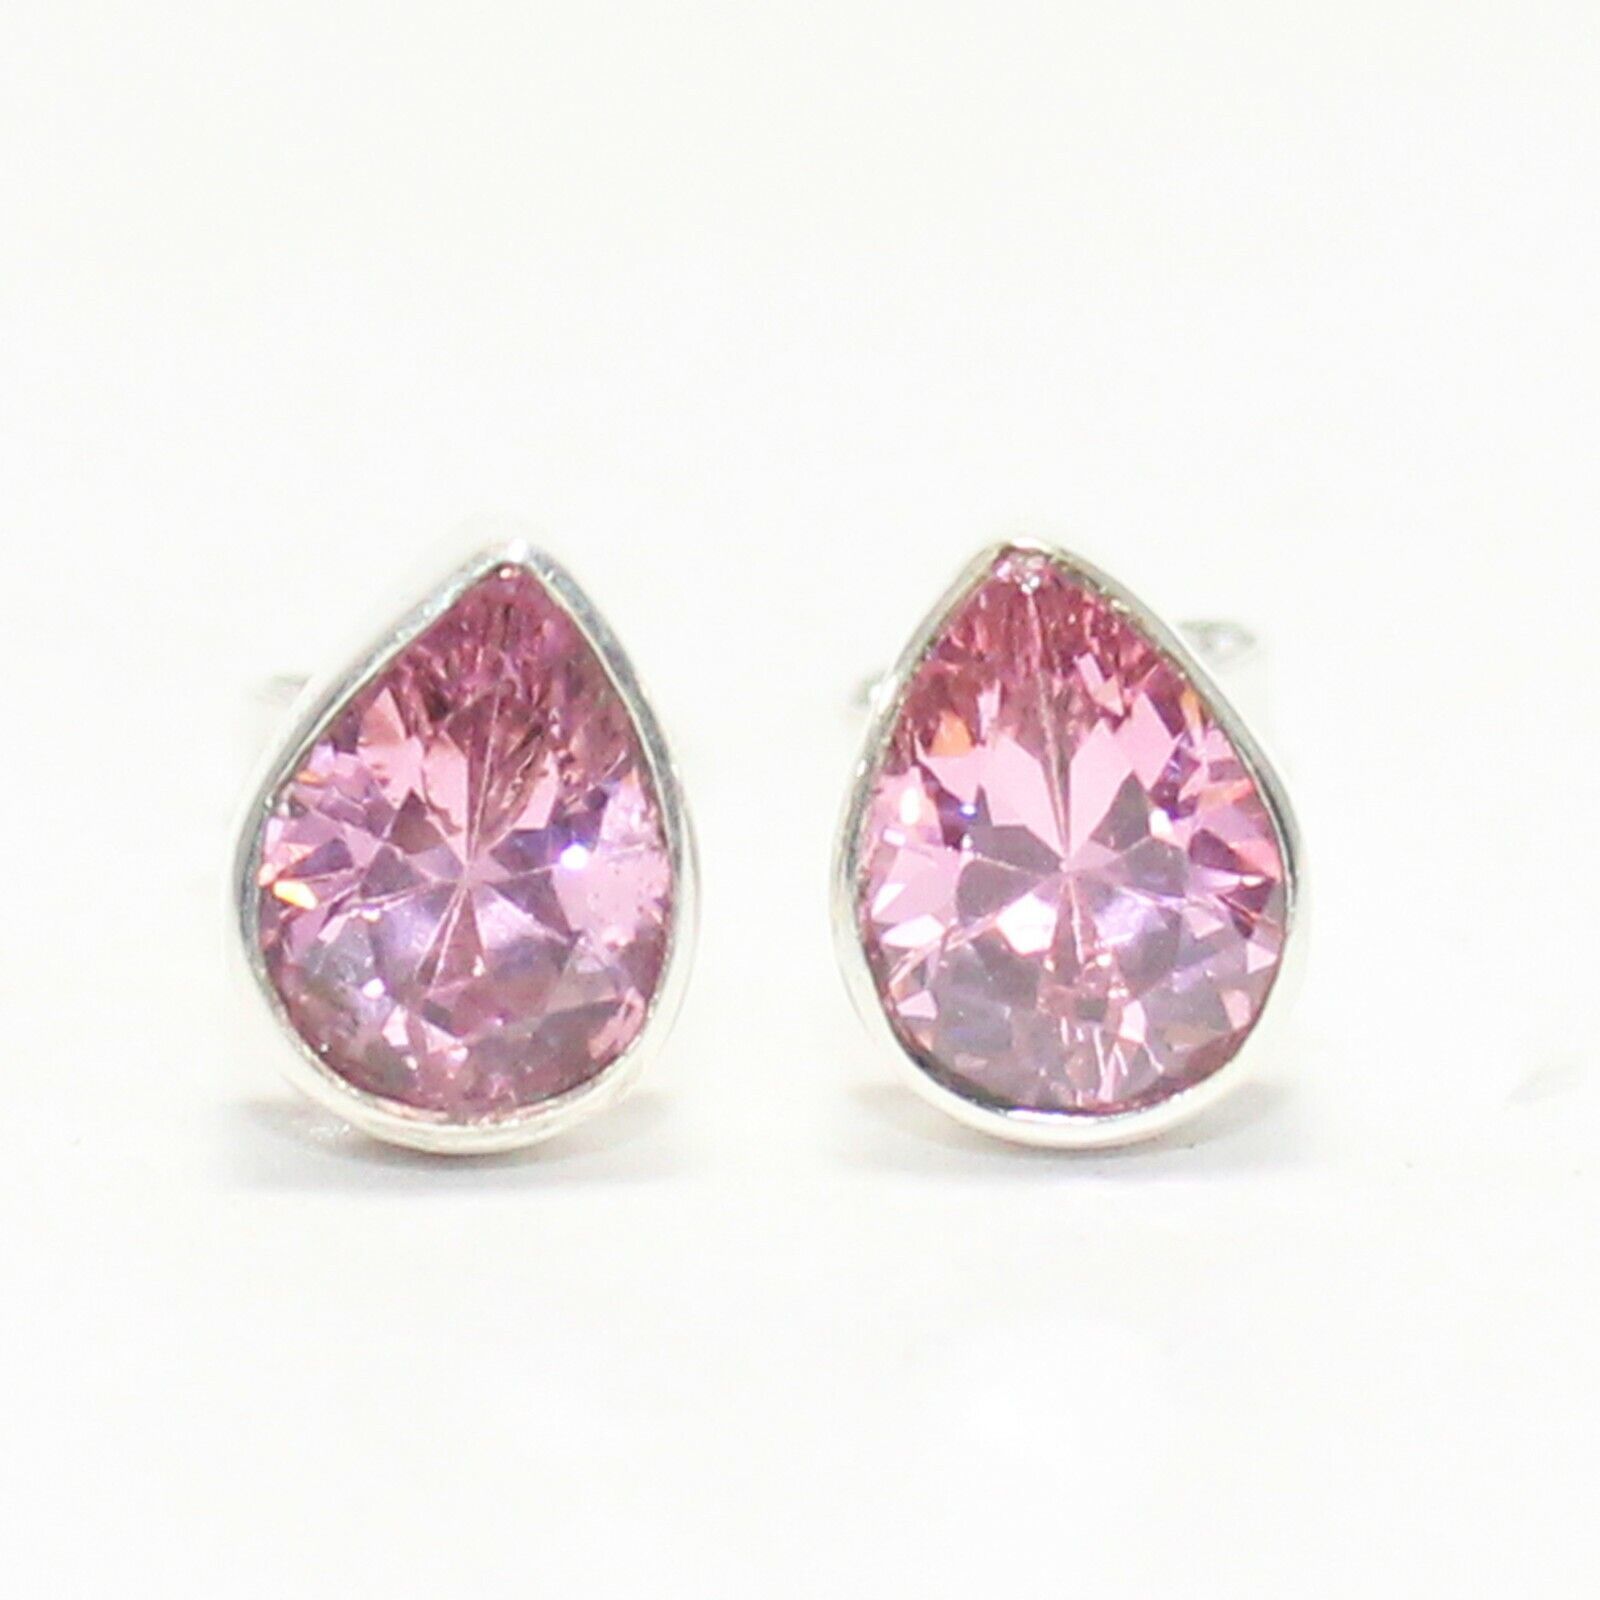 Primary image for PINK TOPAZ Lab-Created Gemstone 925 Sterling Silver Jewelry Stud Earrings